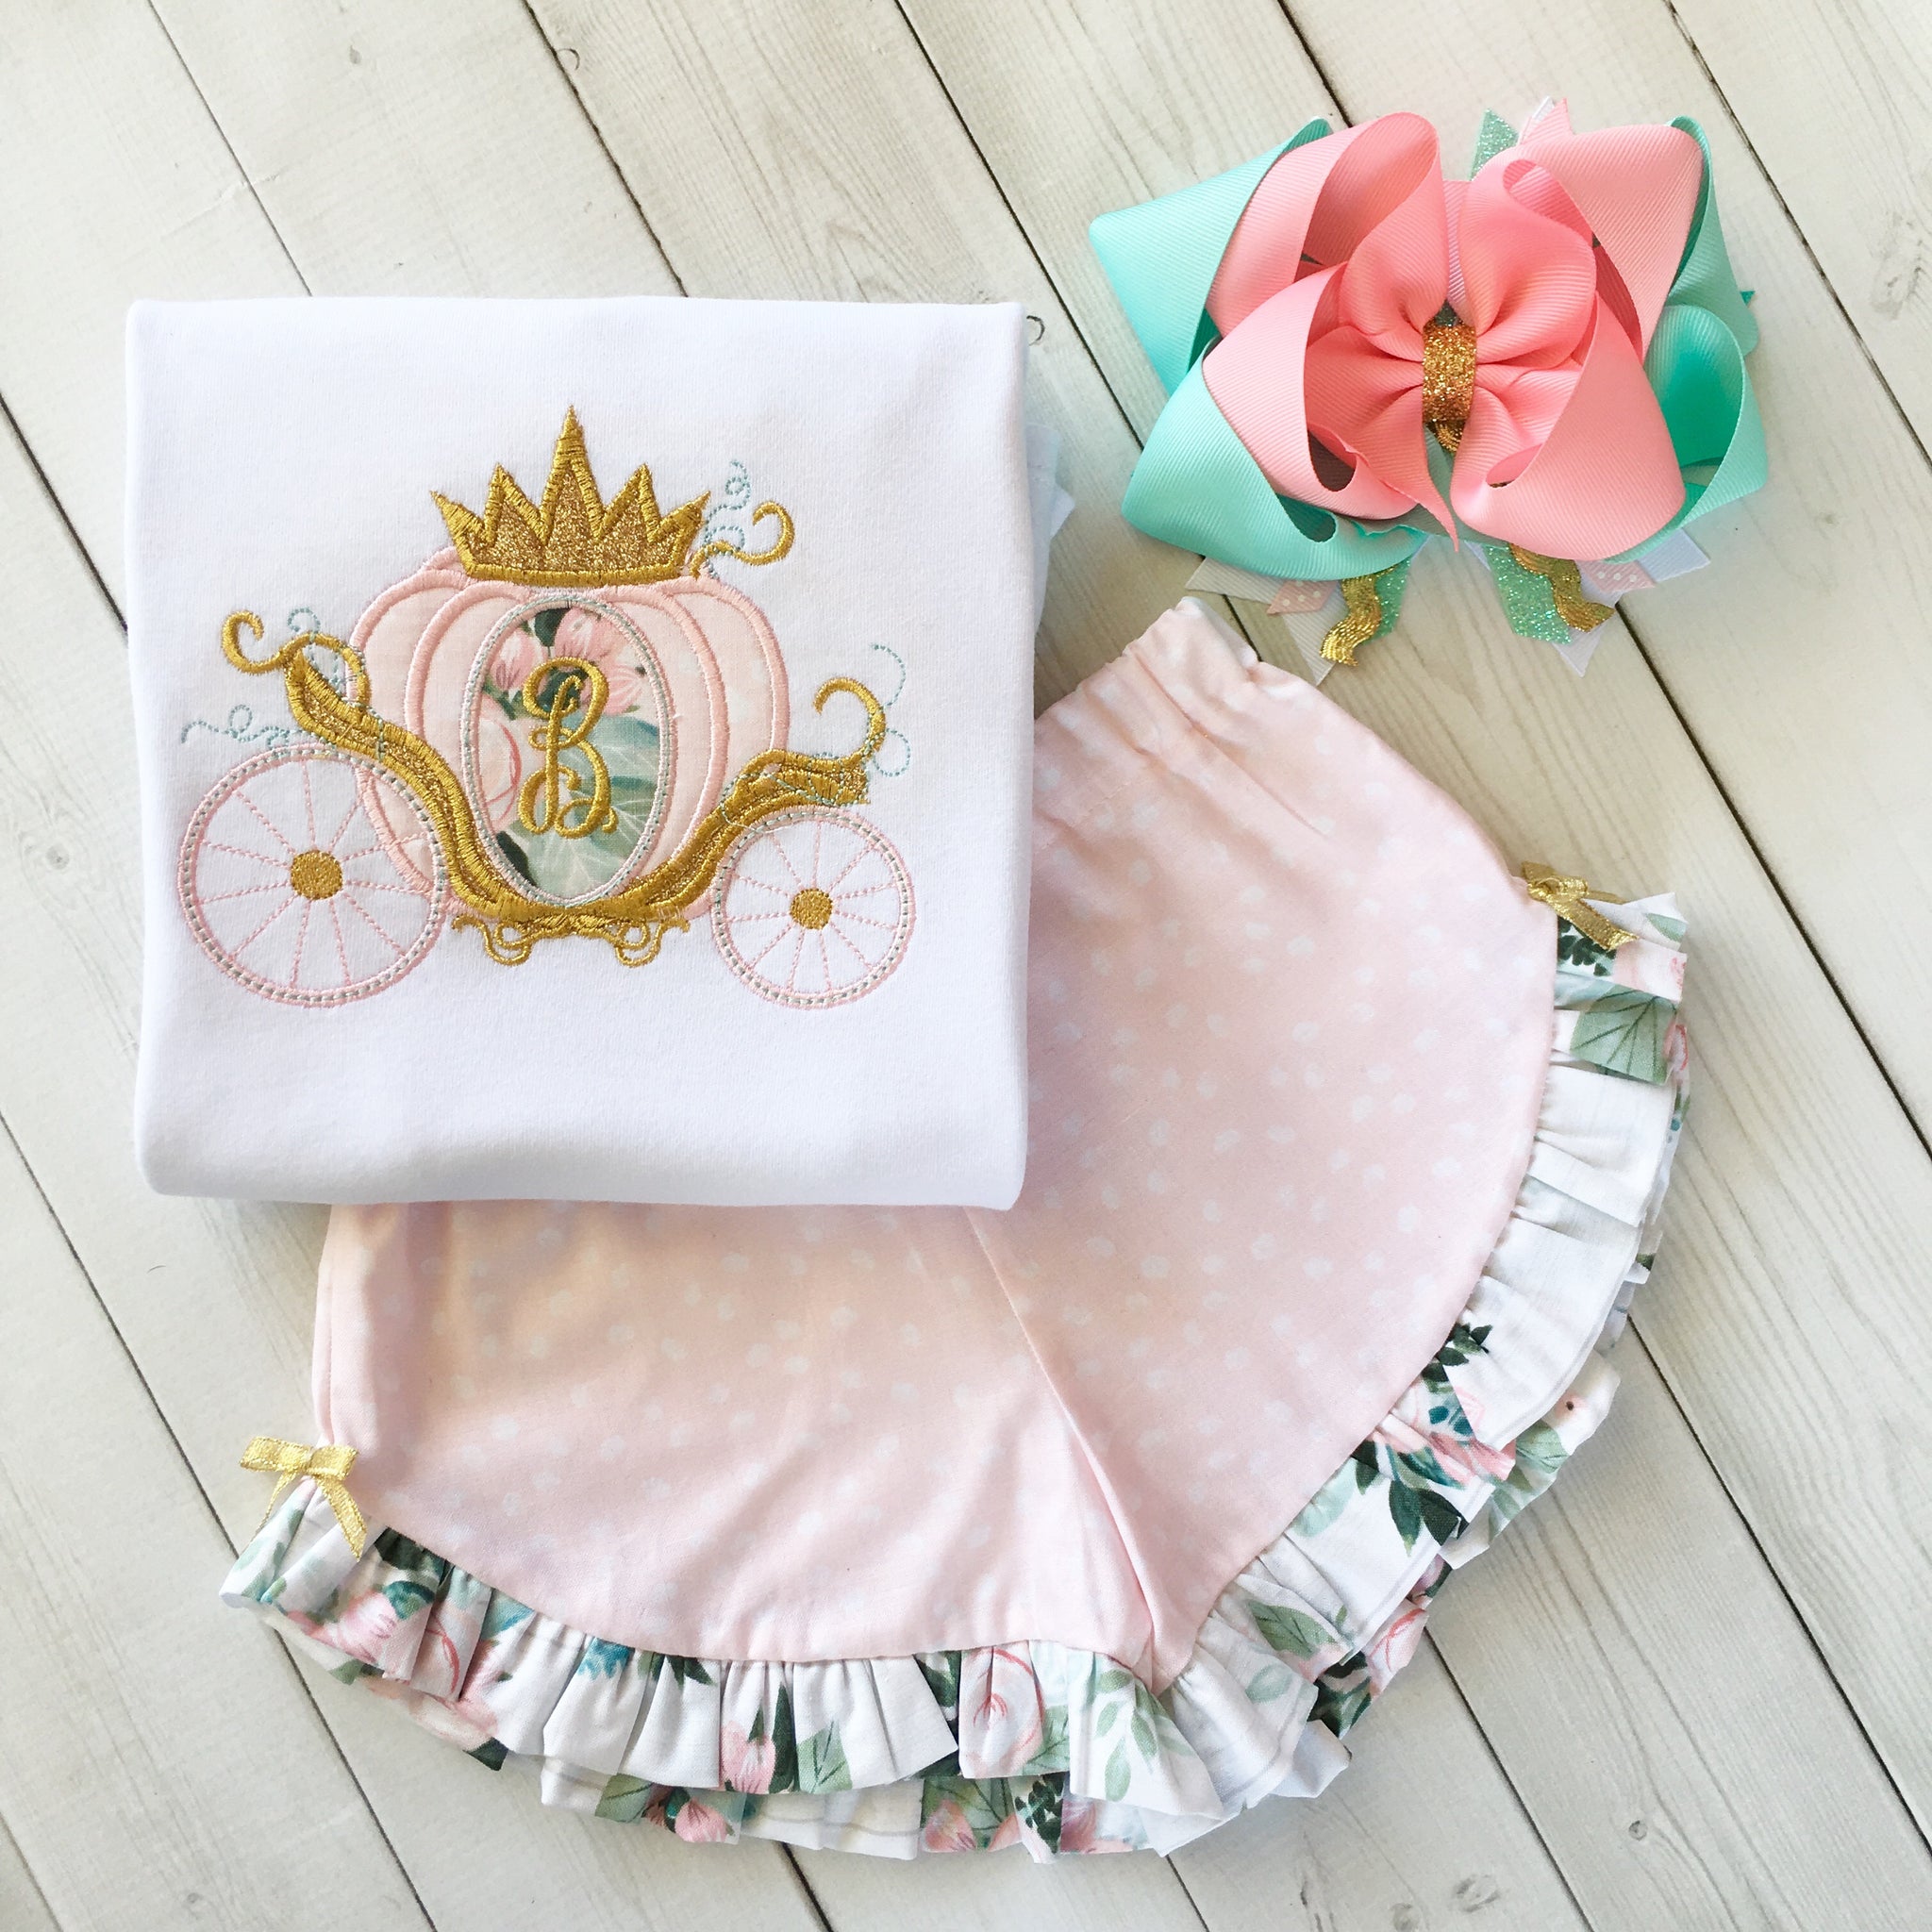 Gorgeous princess outfit for girls, toddlers and babies. Cinderella -like carriage done in pink petals, topped with gold glitter crown. Ruffled shorts are perfection in pink petal fabric finished with floral ruffles and gold bows.